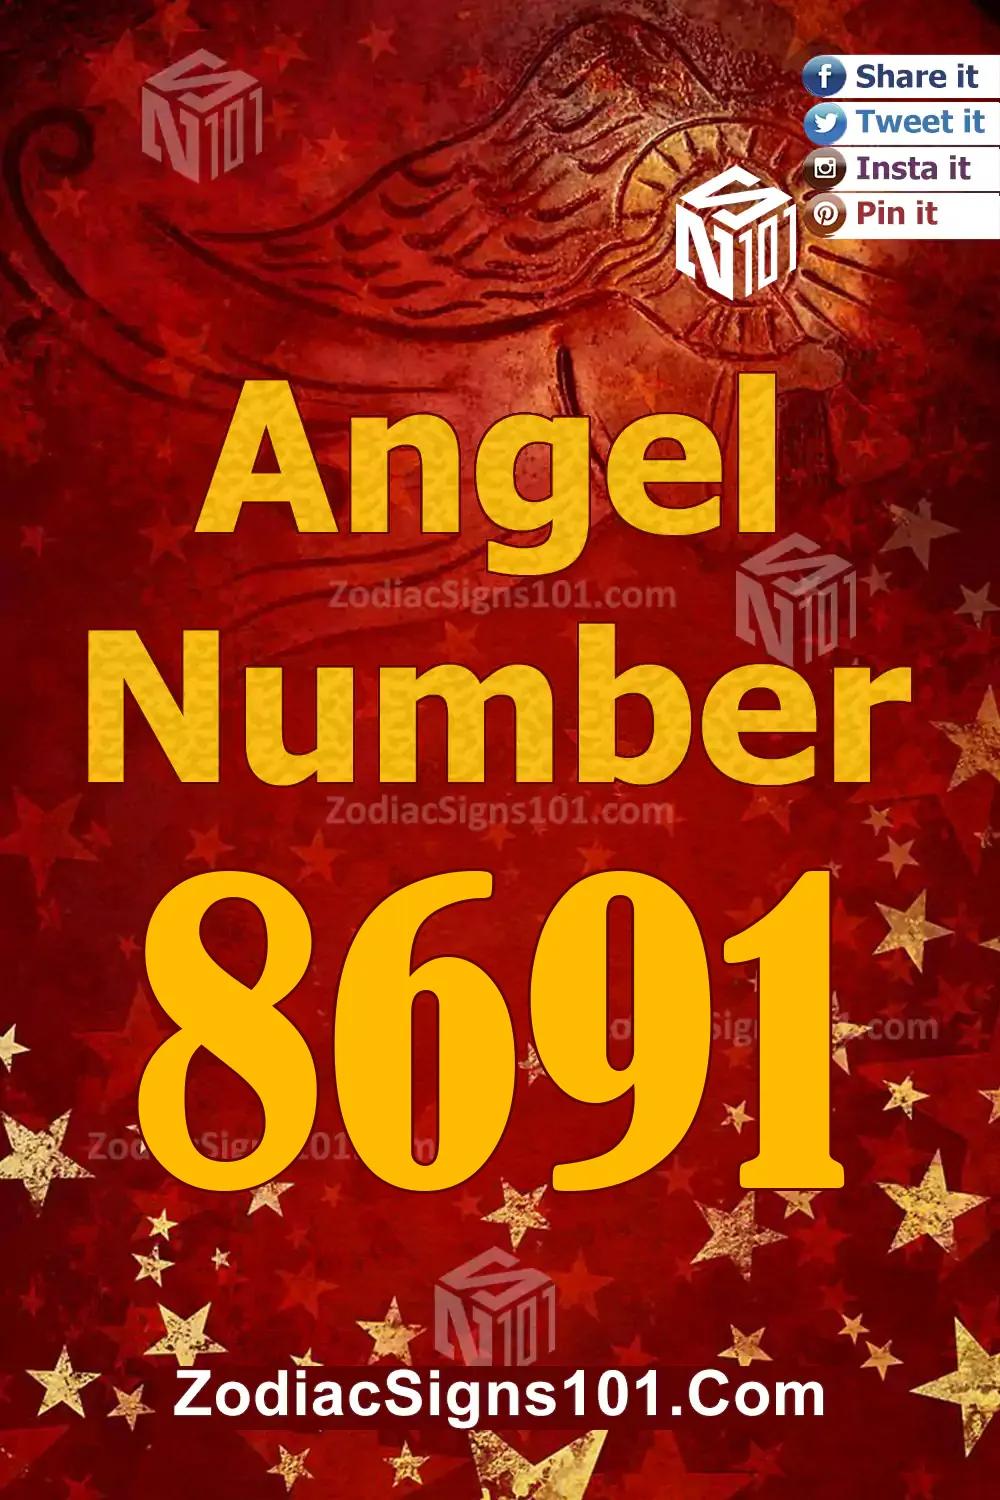 8691 Angel Number Meaning